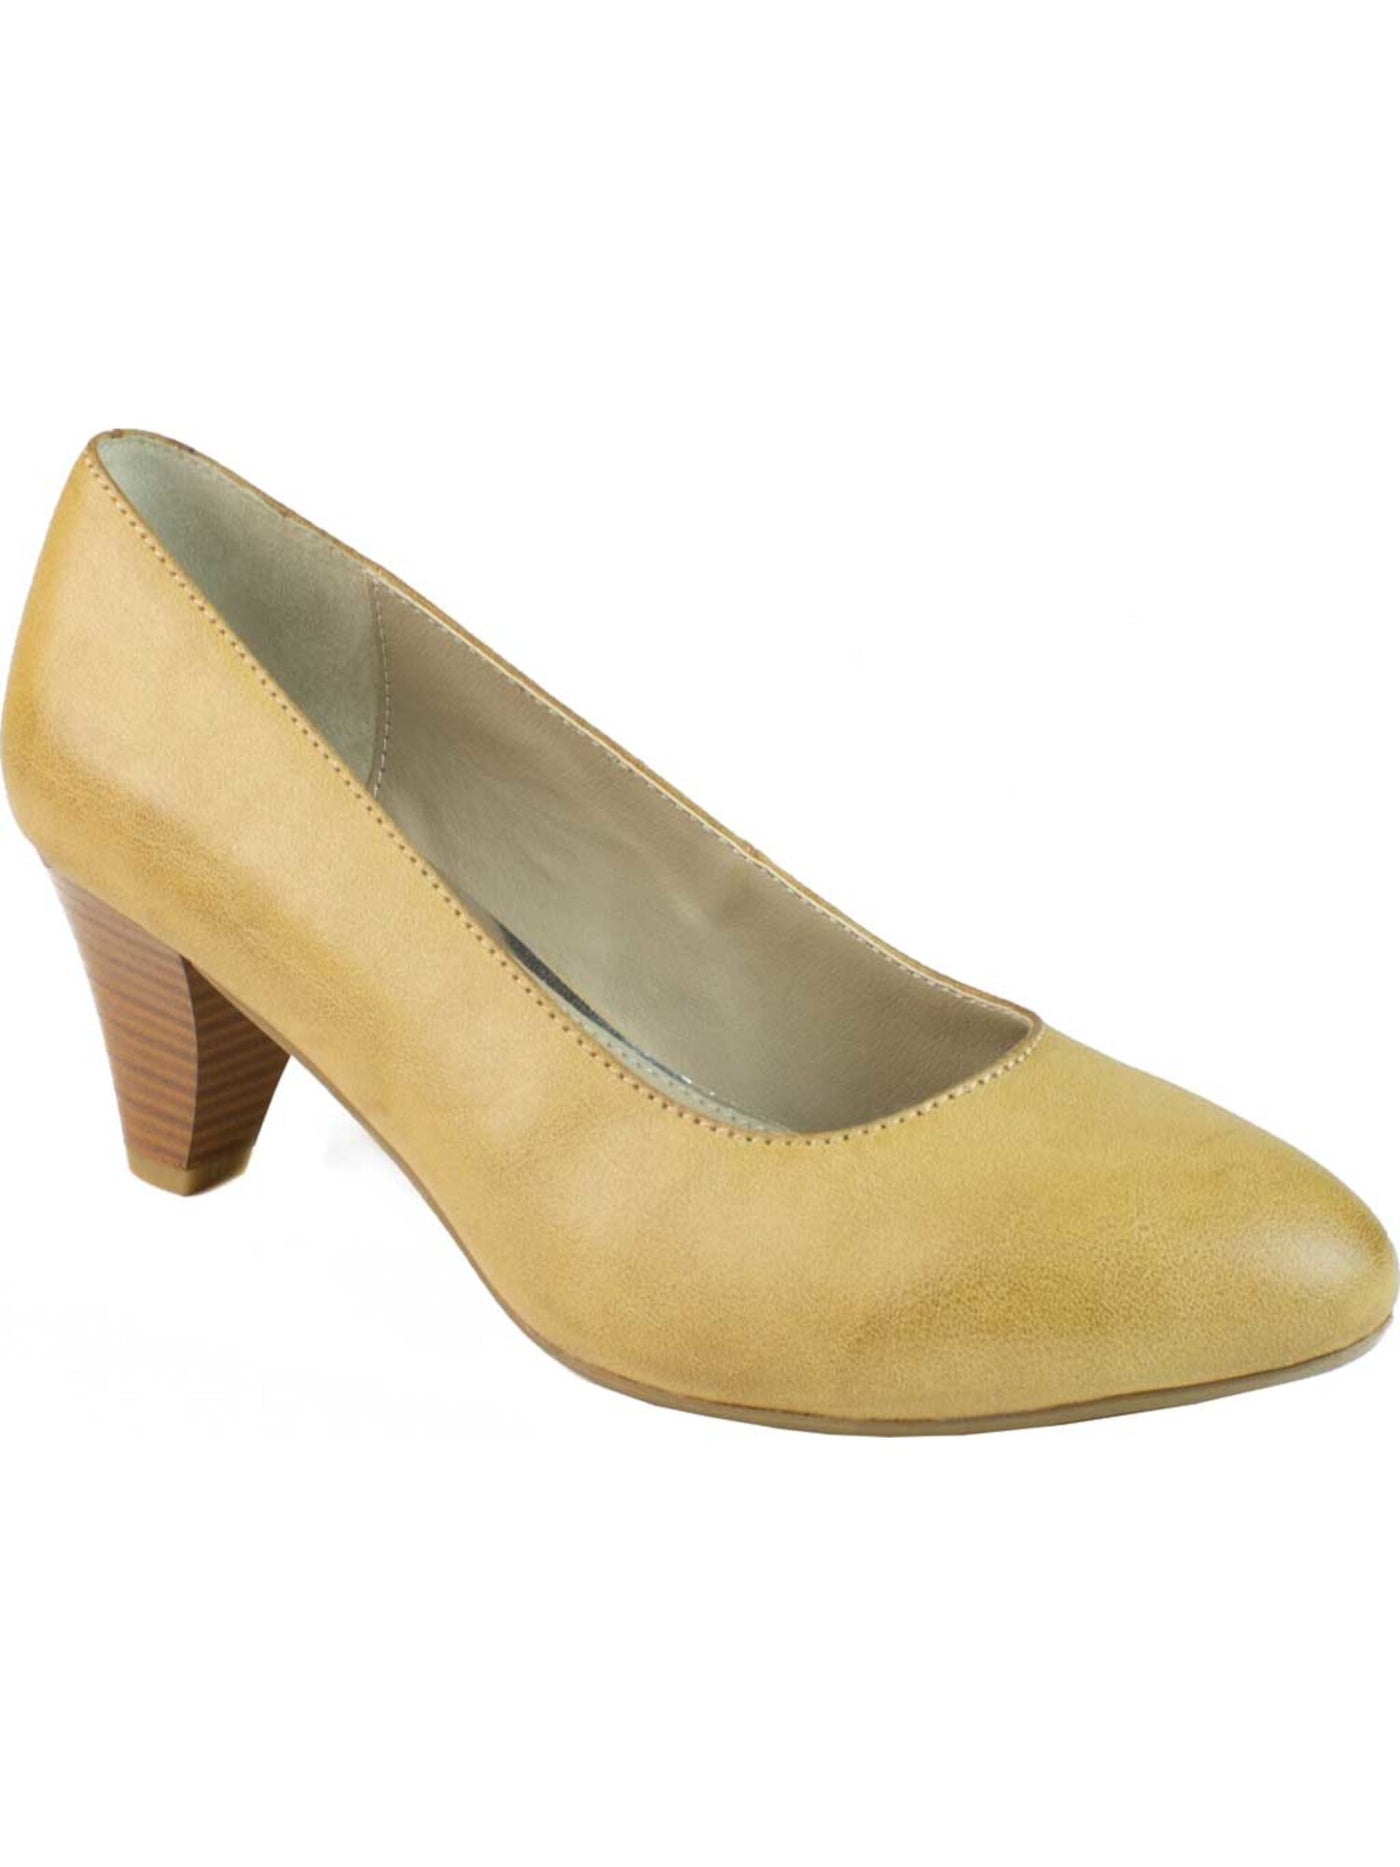 RIALTO Womens Beige Cushioned Comfort Stanford Almond Toe Stacked Heel Slip On Pumps Shoes 8.5